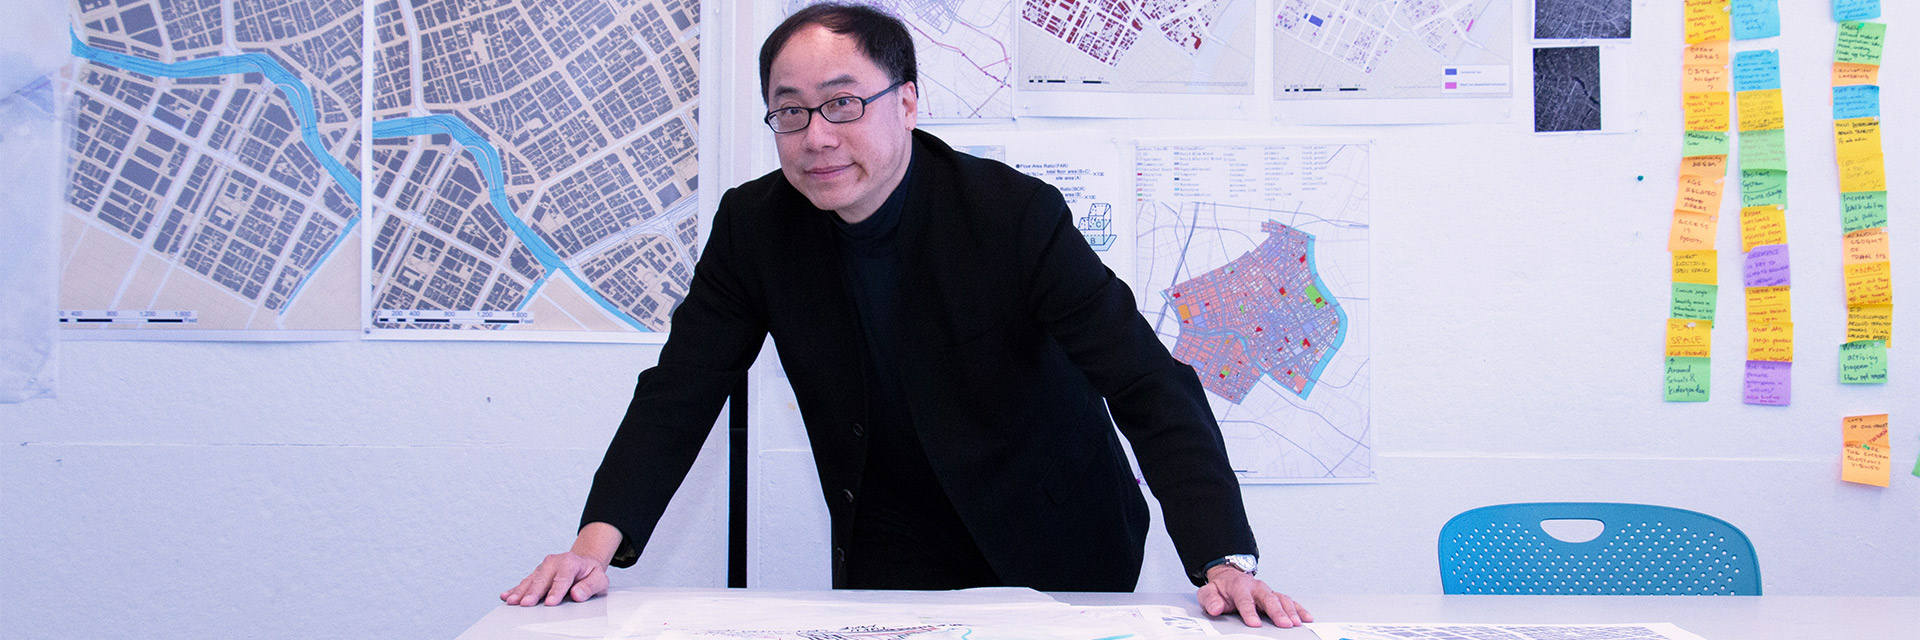 Perry Yang in front of urban design posters